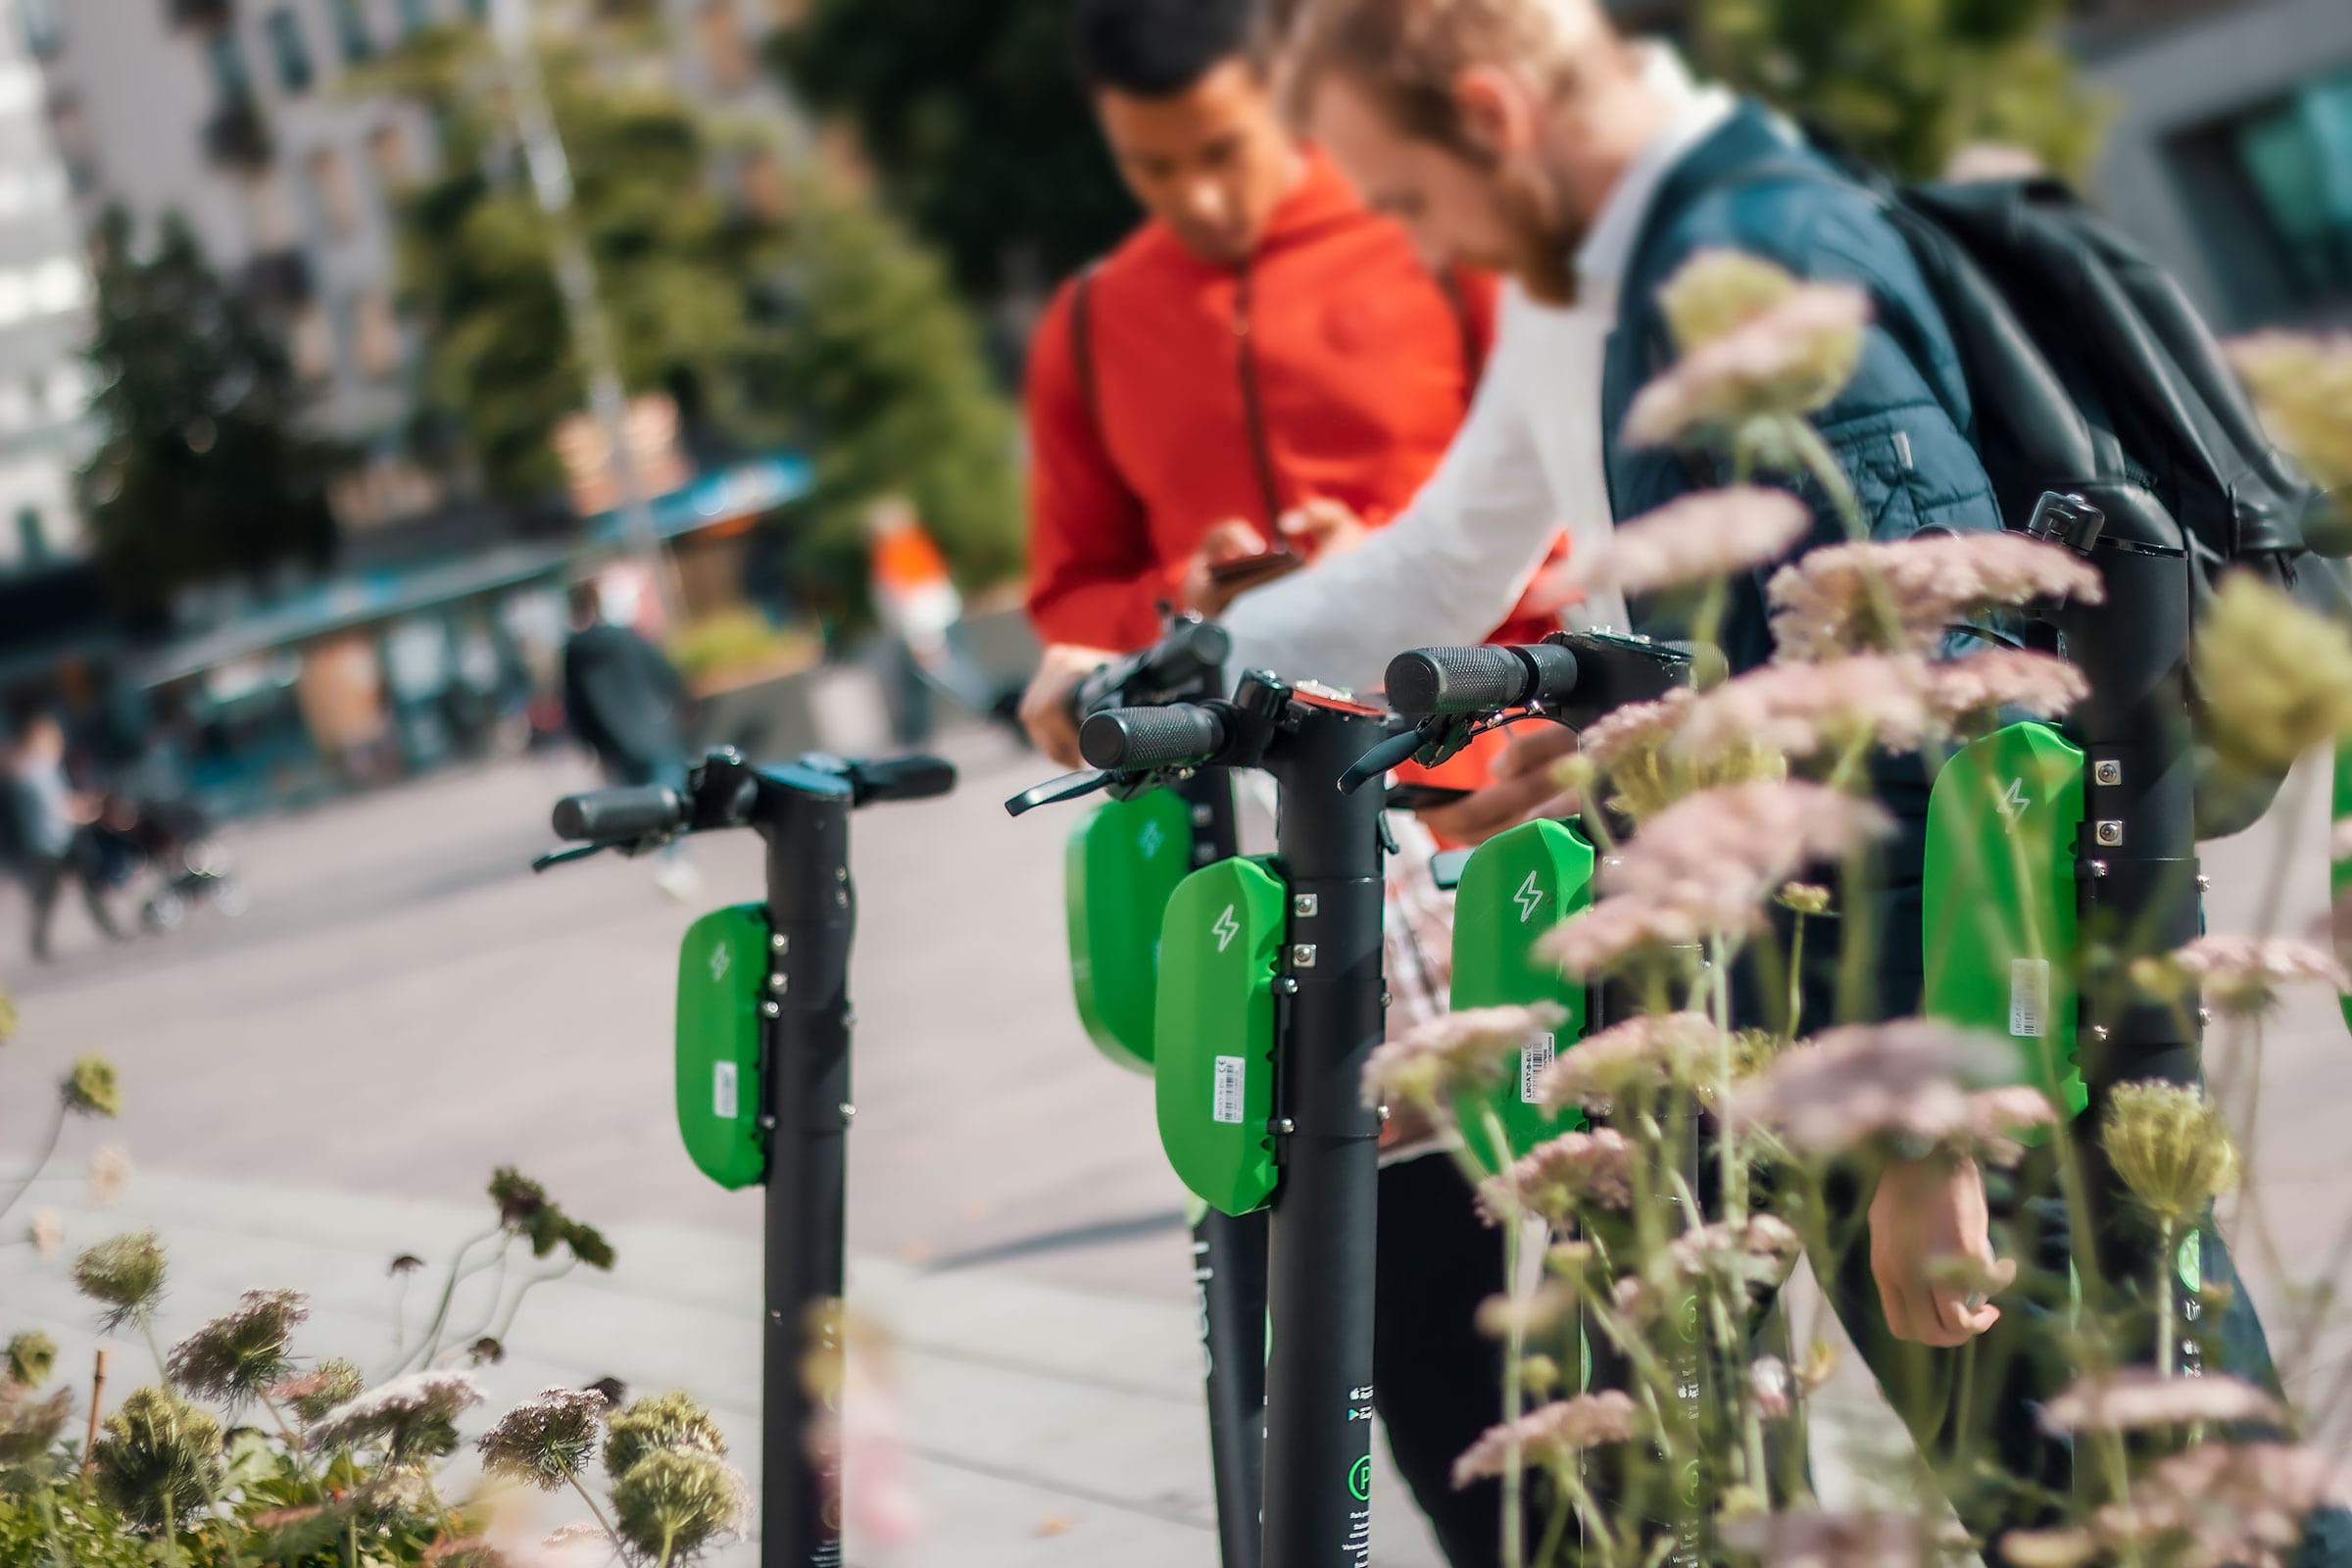 Getting around Gothenburg - how to hire an electric scooter